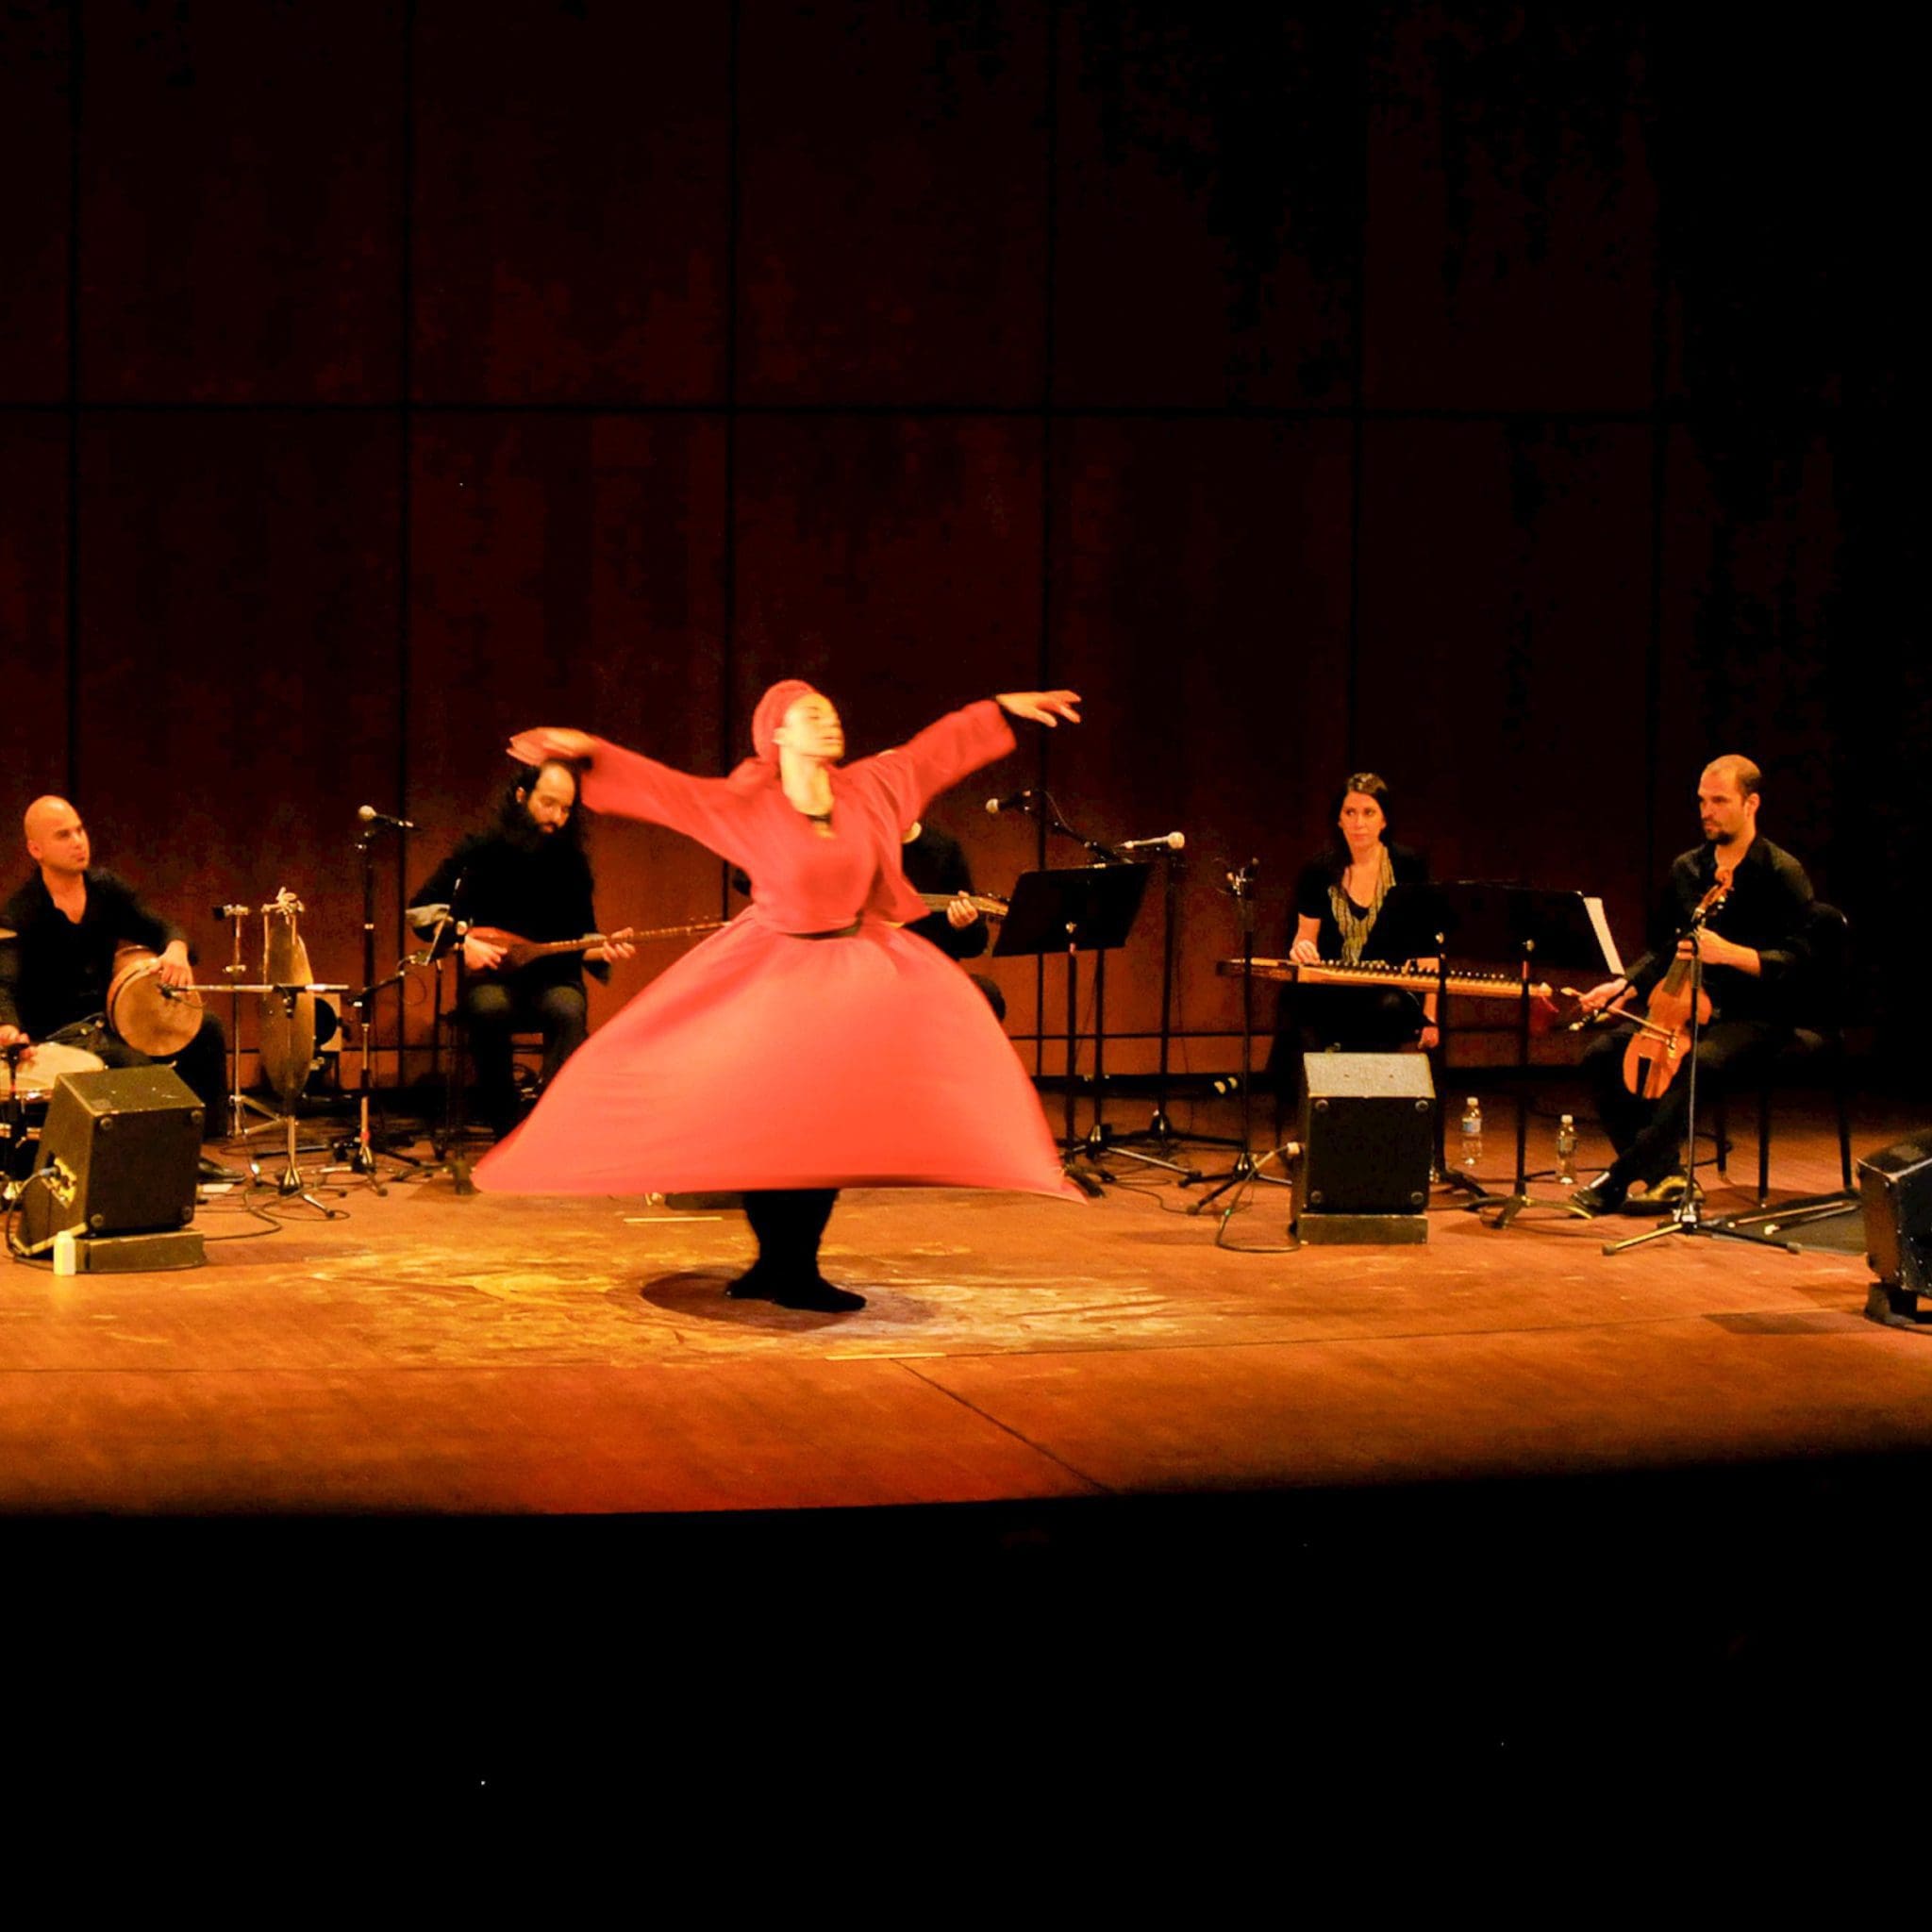 Musicians and whirling dervish on stage